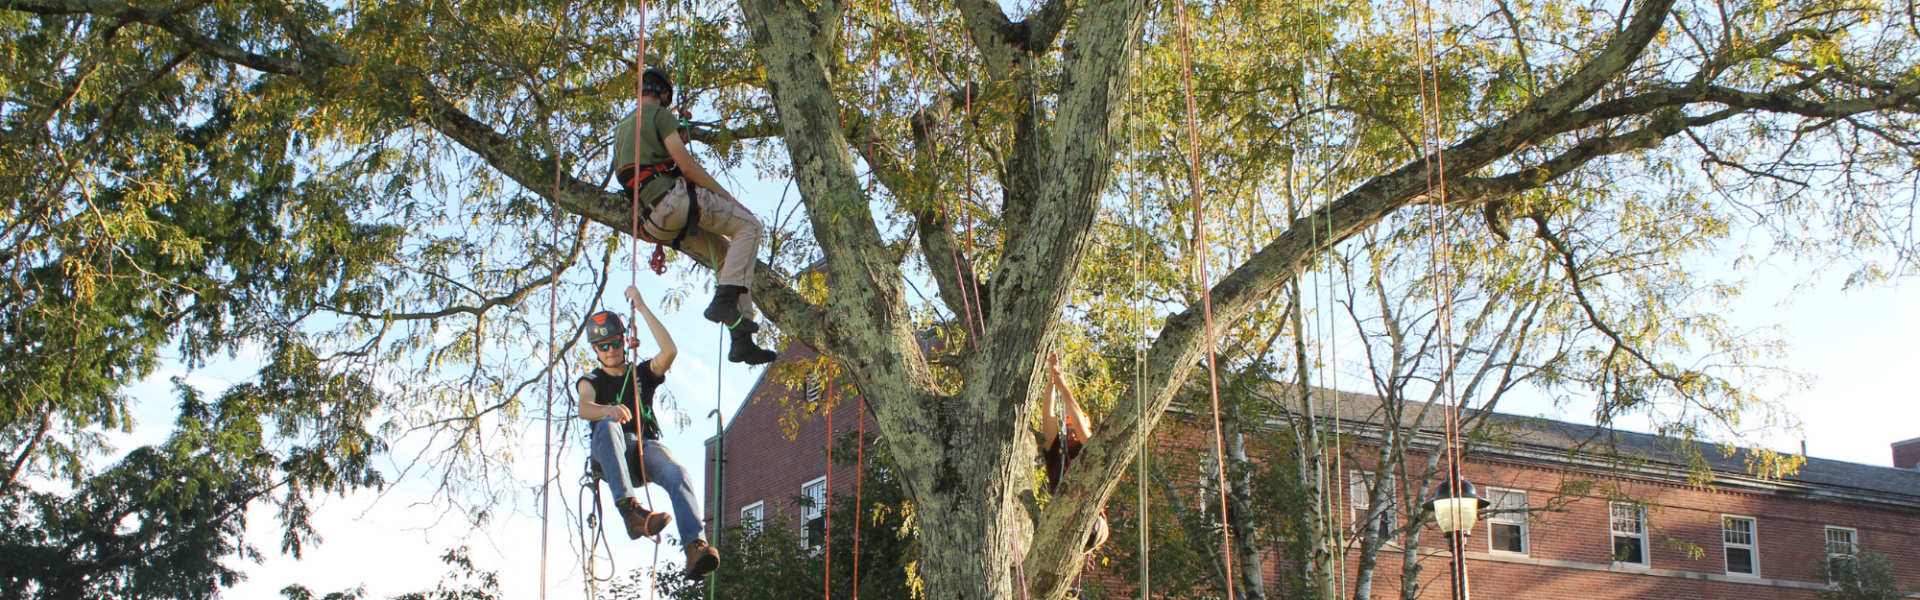 arboriculture students at UConn sitting in tree and practicing with ropes